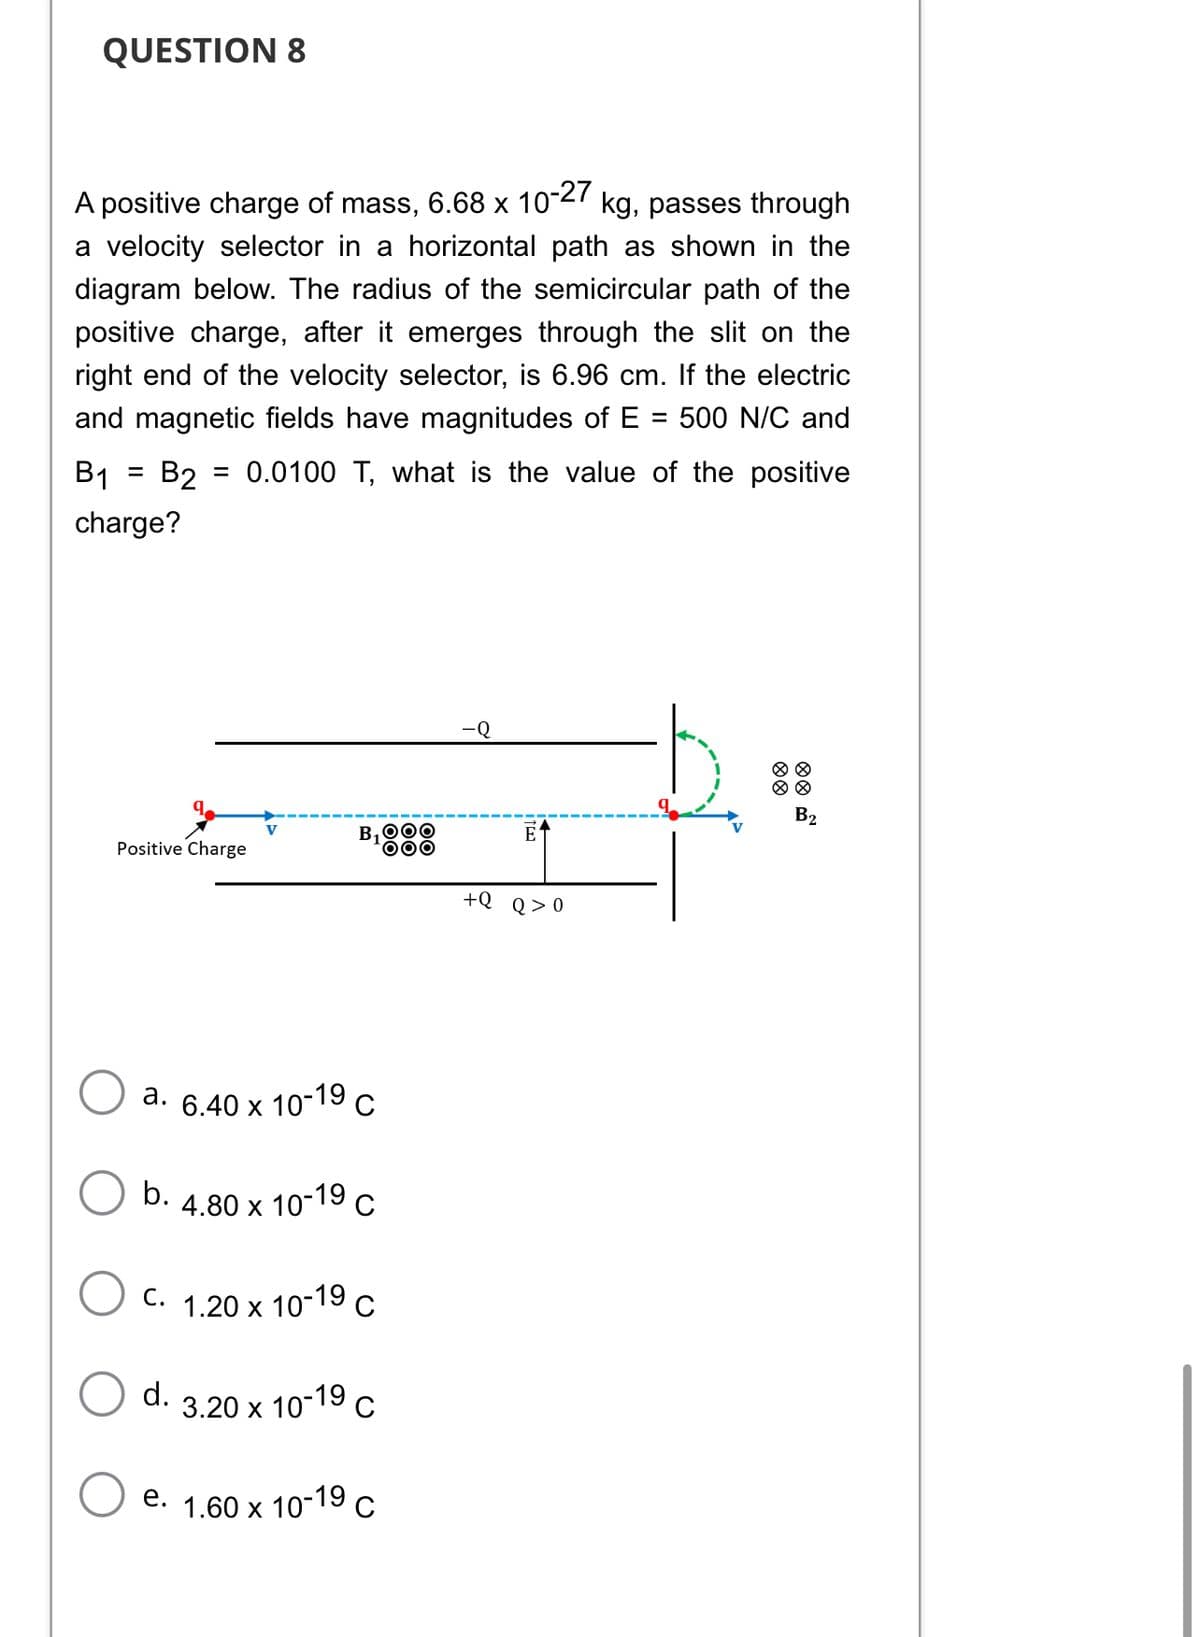 QUESTION 8
A positive charge of mass, 6.68 x 10-27 kg, passes through
a velocity selector in a horizontal path as shown in the
diagram below. The radius of the semicircular path of the
positive charge, after it emerges through the slit on the
right end of the velocity selector, is 6.96 cm. If the electric
and magnetic fields have magnitudes of E = 500 N/C and
= 0.0100 T, what is the value of the positive
B1
=
B2
charge?
B₂
E
B₁OOO
DOO
+Q Q>0
Positive Charge
V
a. 6.40 x 10
-19 C
b.
4.80 x 10-19 C
C.
1.20 x 10-19 C
d. 3.20 x 10-19 C
e. 1.60 × 10-19 C
X